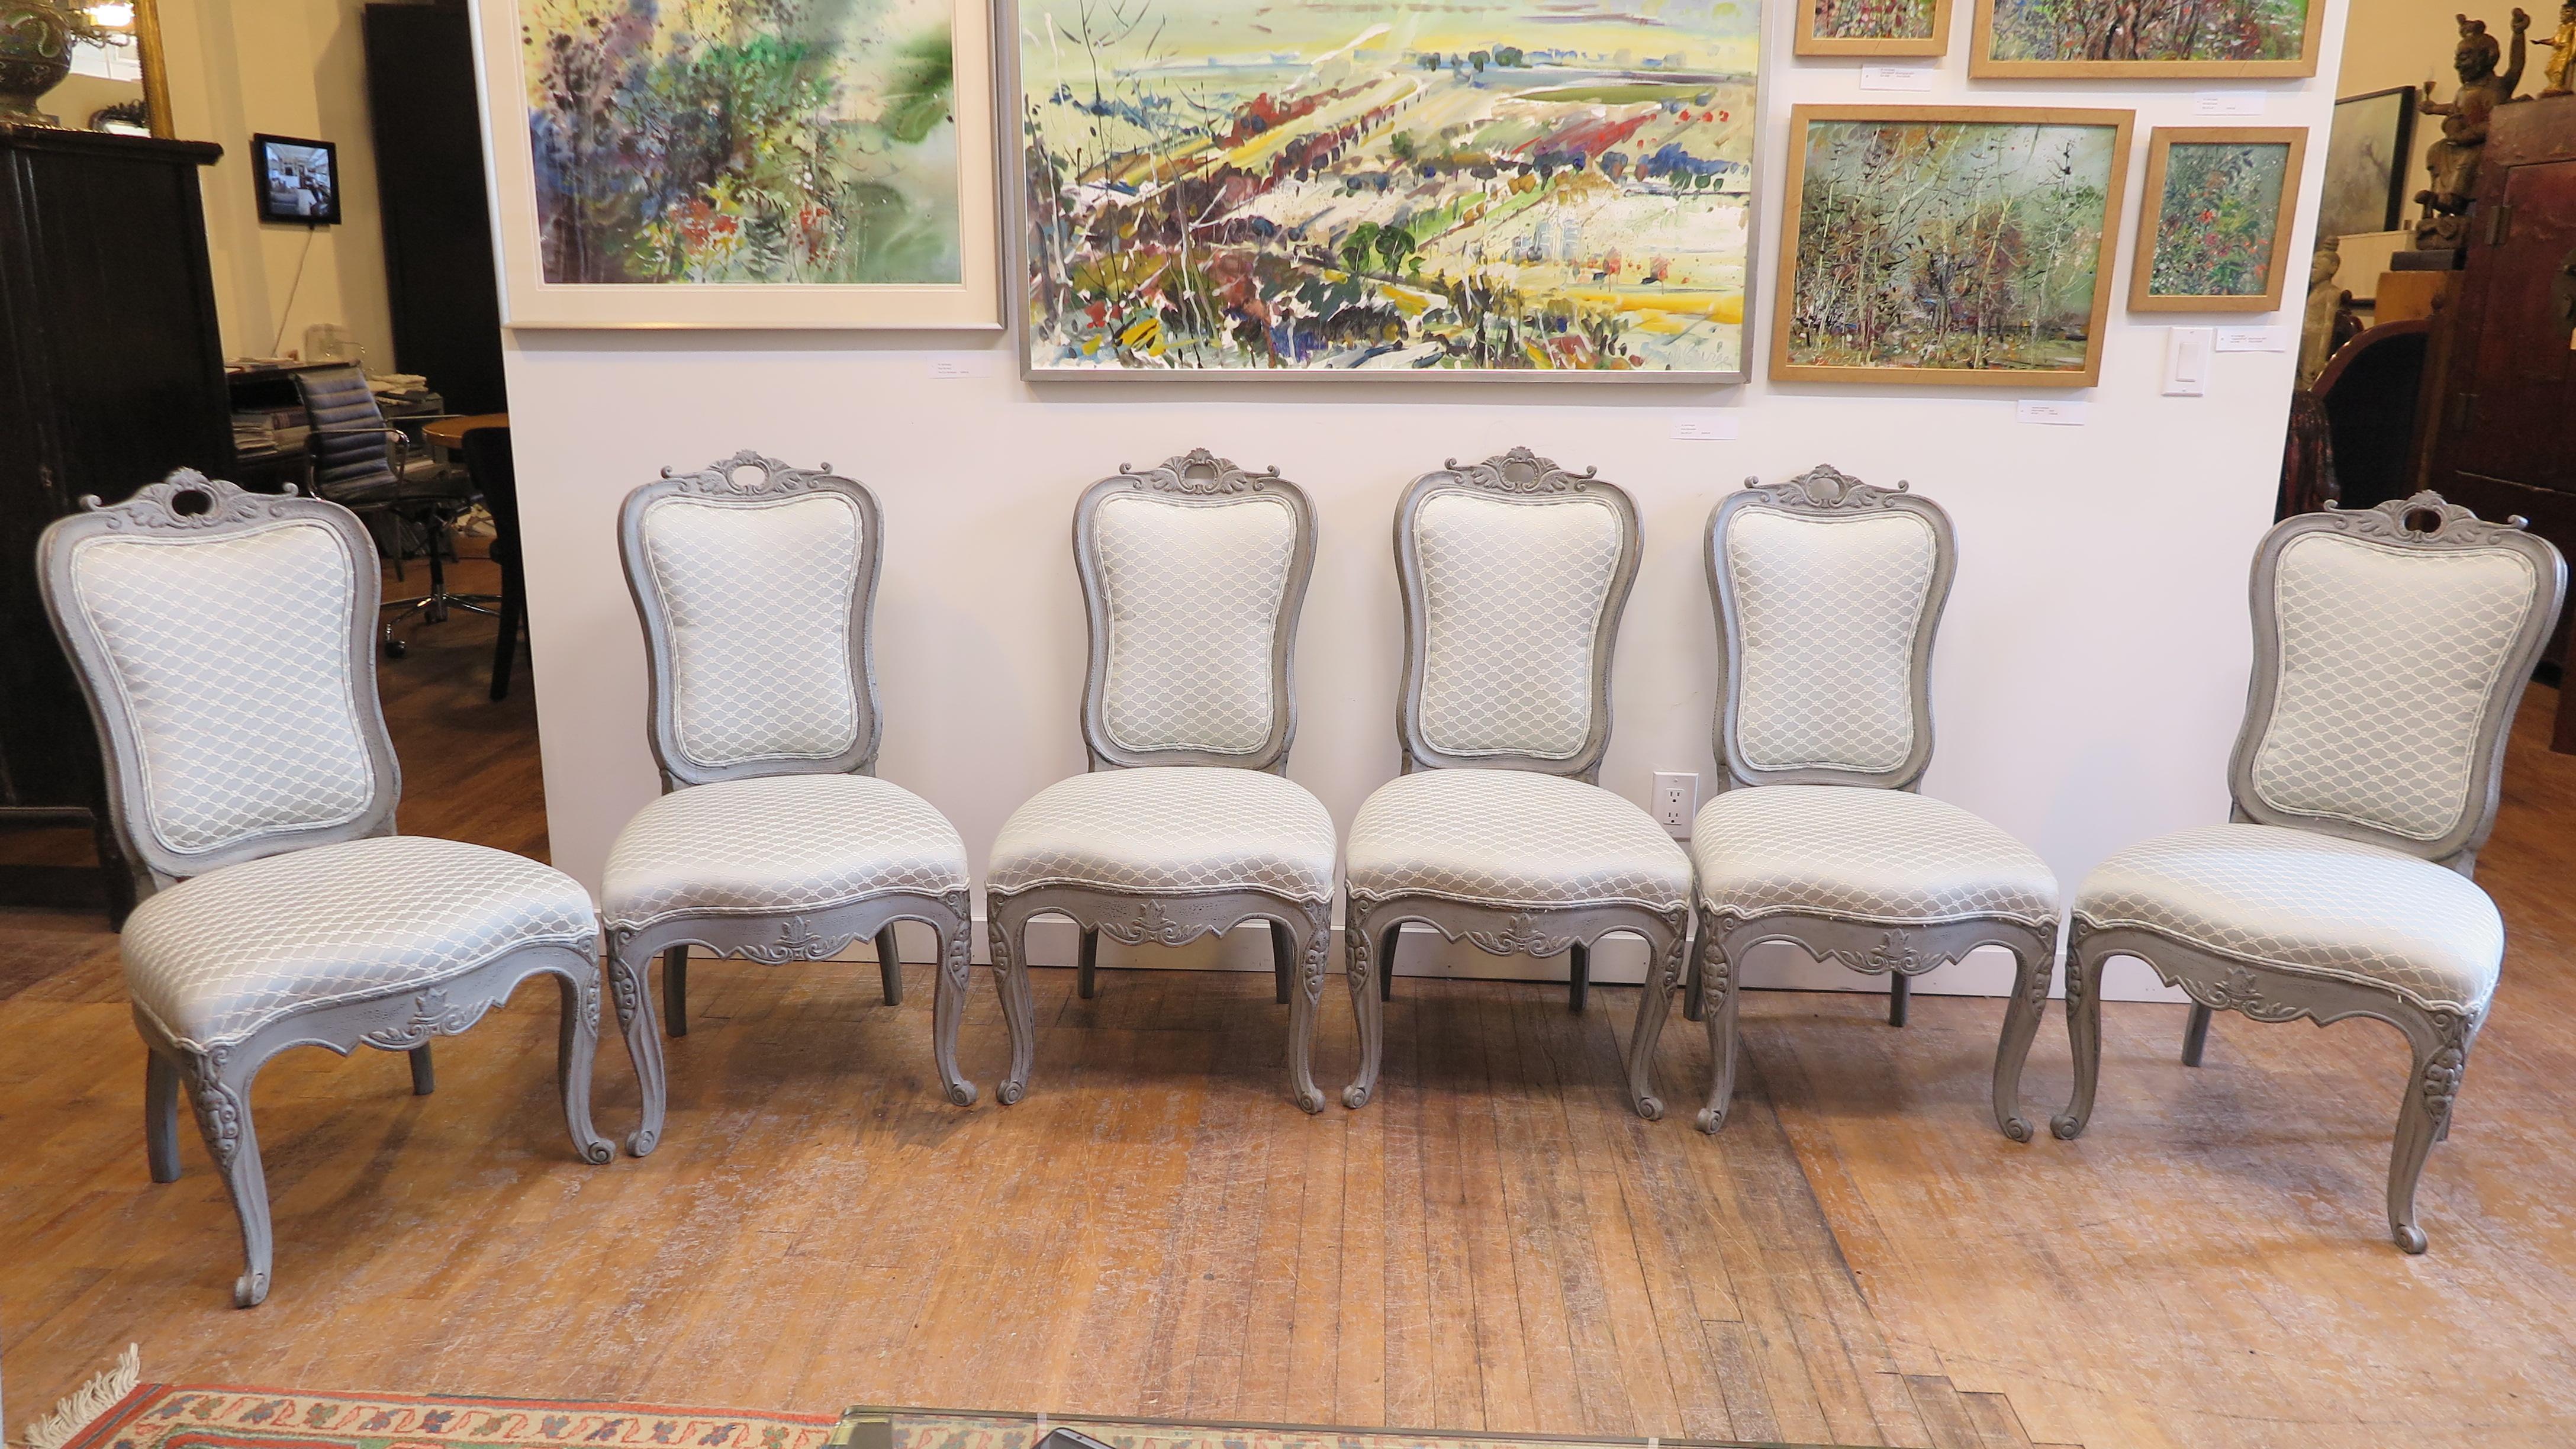 Antique Swedish Gustavian style dining chairs. Nicely carved with curved backs, very comfortable. Upholstery is good condition and can be placed as is, cushions are firm with very good support, backs and seats. Chairs are solid wood and in solid and